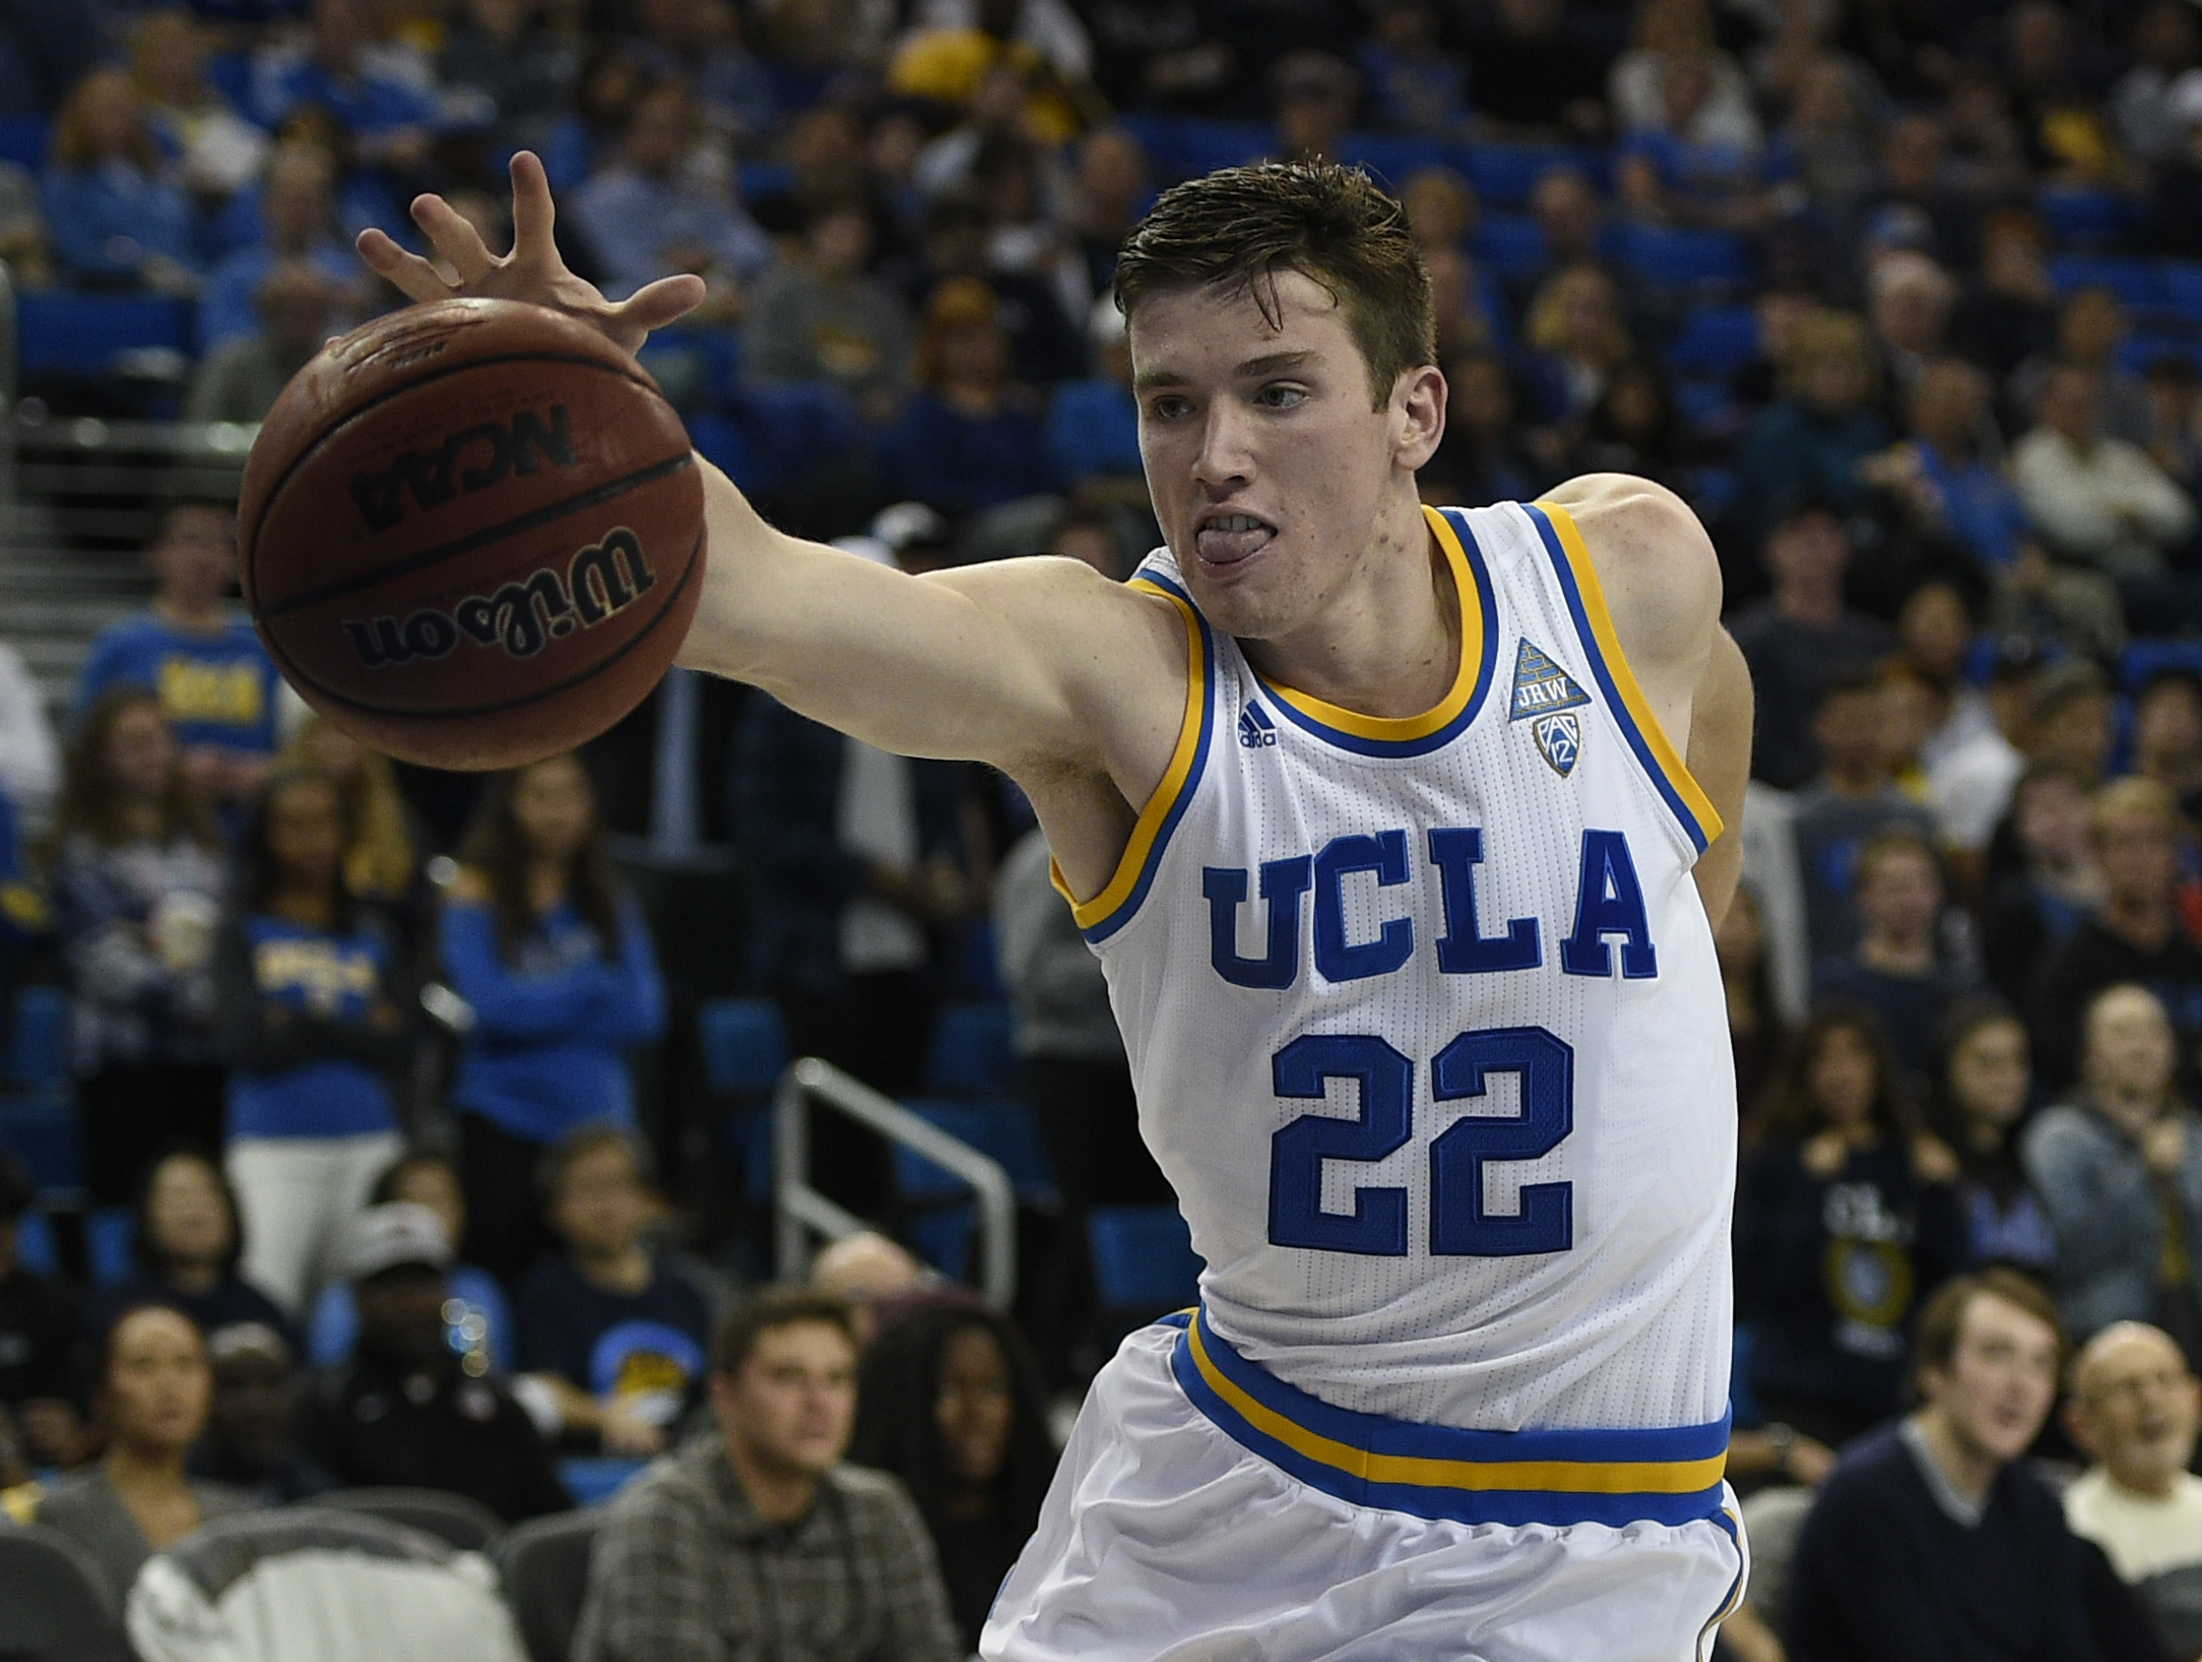 Nov 20, 2016; Los Angeles, CA, USA; UCLA Bruins forward TJ Leaf (22) reaches for the loose ball against the Long Beach State 49ers during the second half at Pauley Pavilion. The UCLA Bruins won 114-77. Mandatory Credit: Kelvin Kuo-USA TODAY Sports ORG XMIT: USATSI-328980 ORIG FILE ID:  20161120_kek_ak6_022.JPG